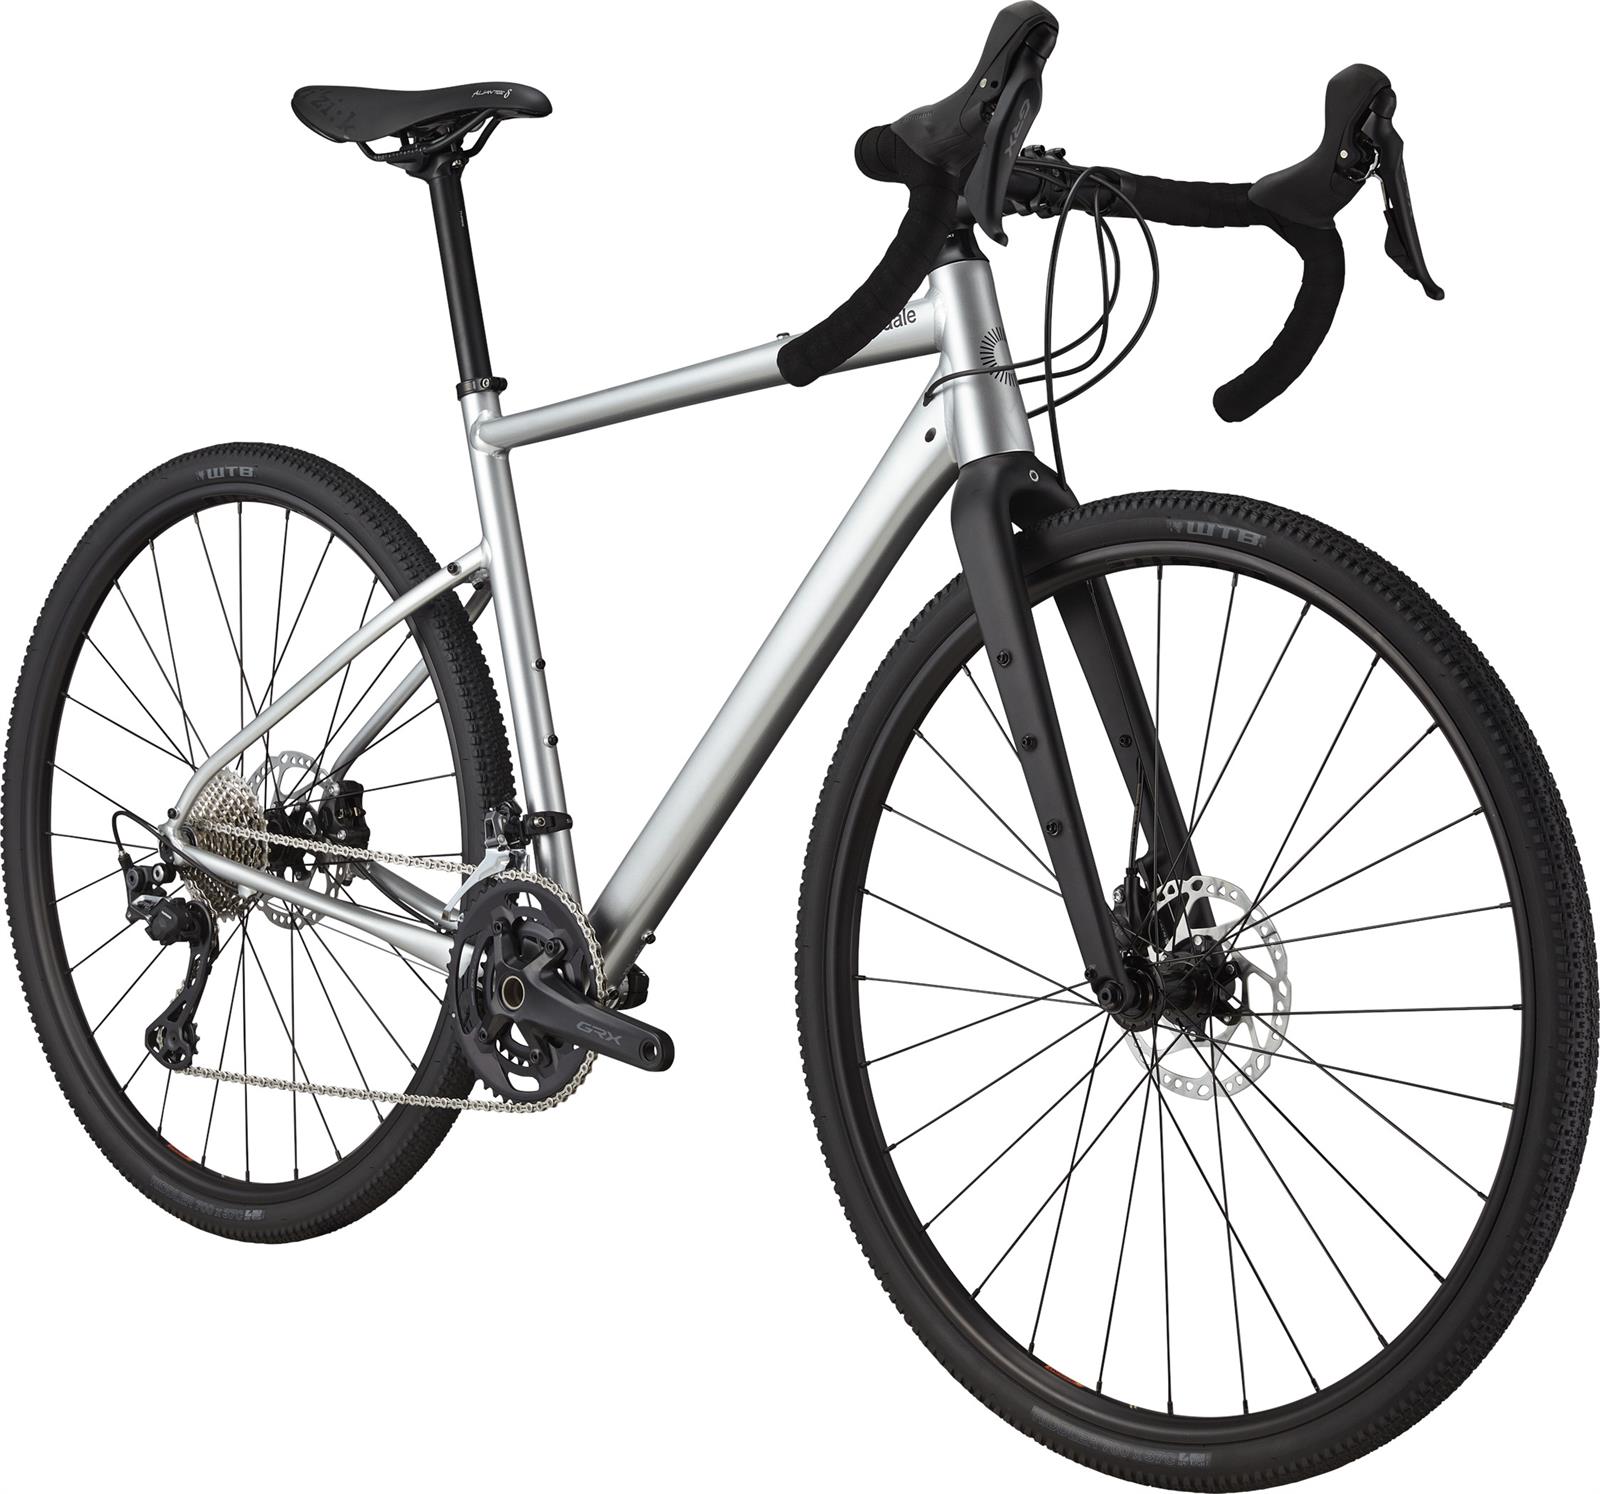 CANNONDALE Topstone 1